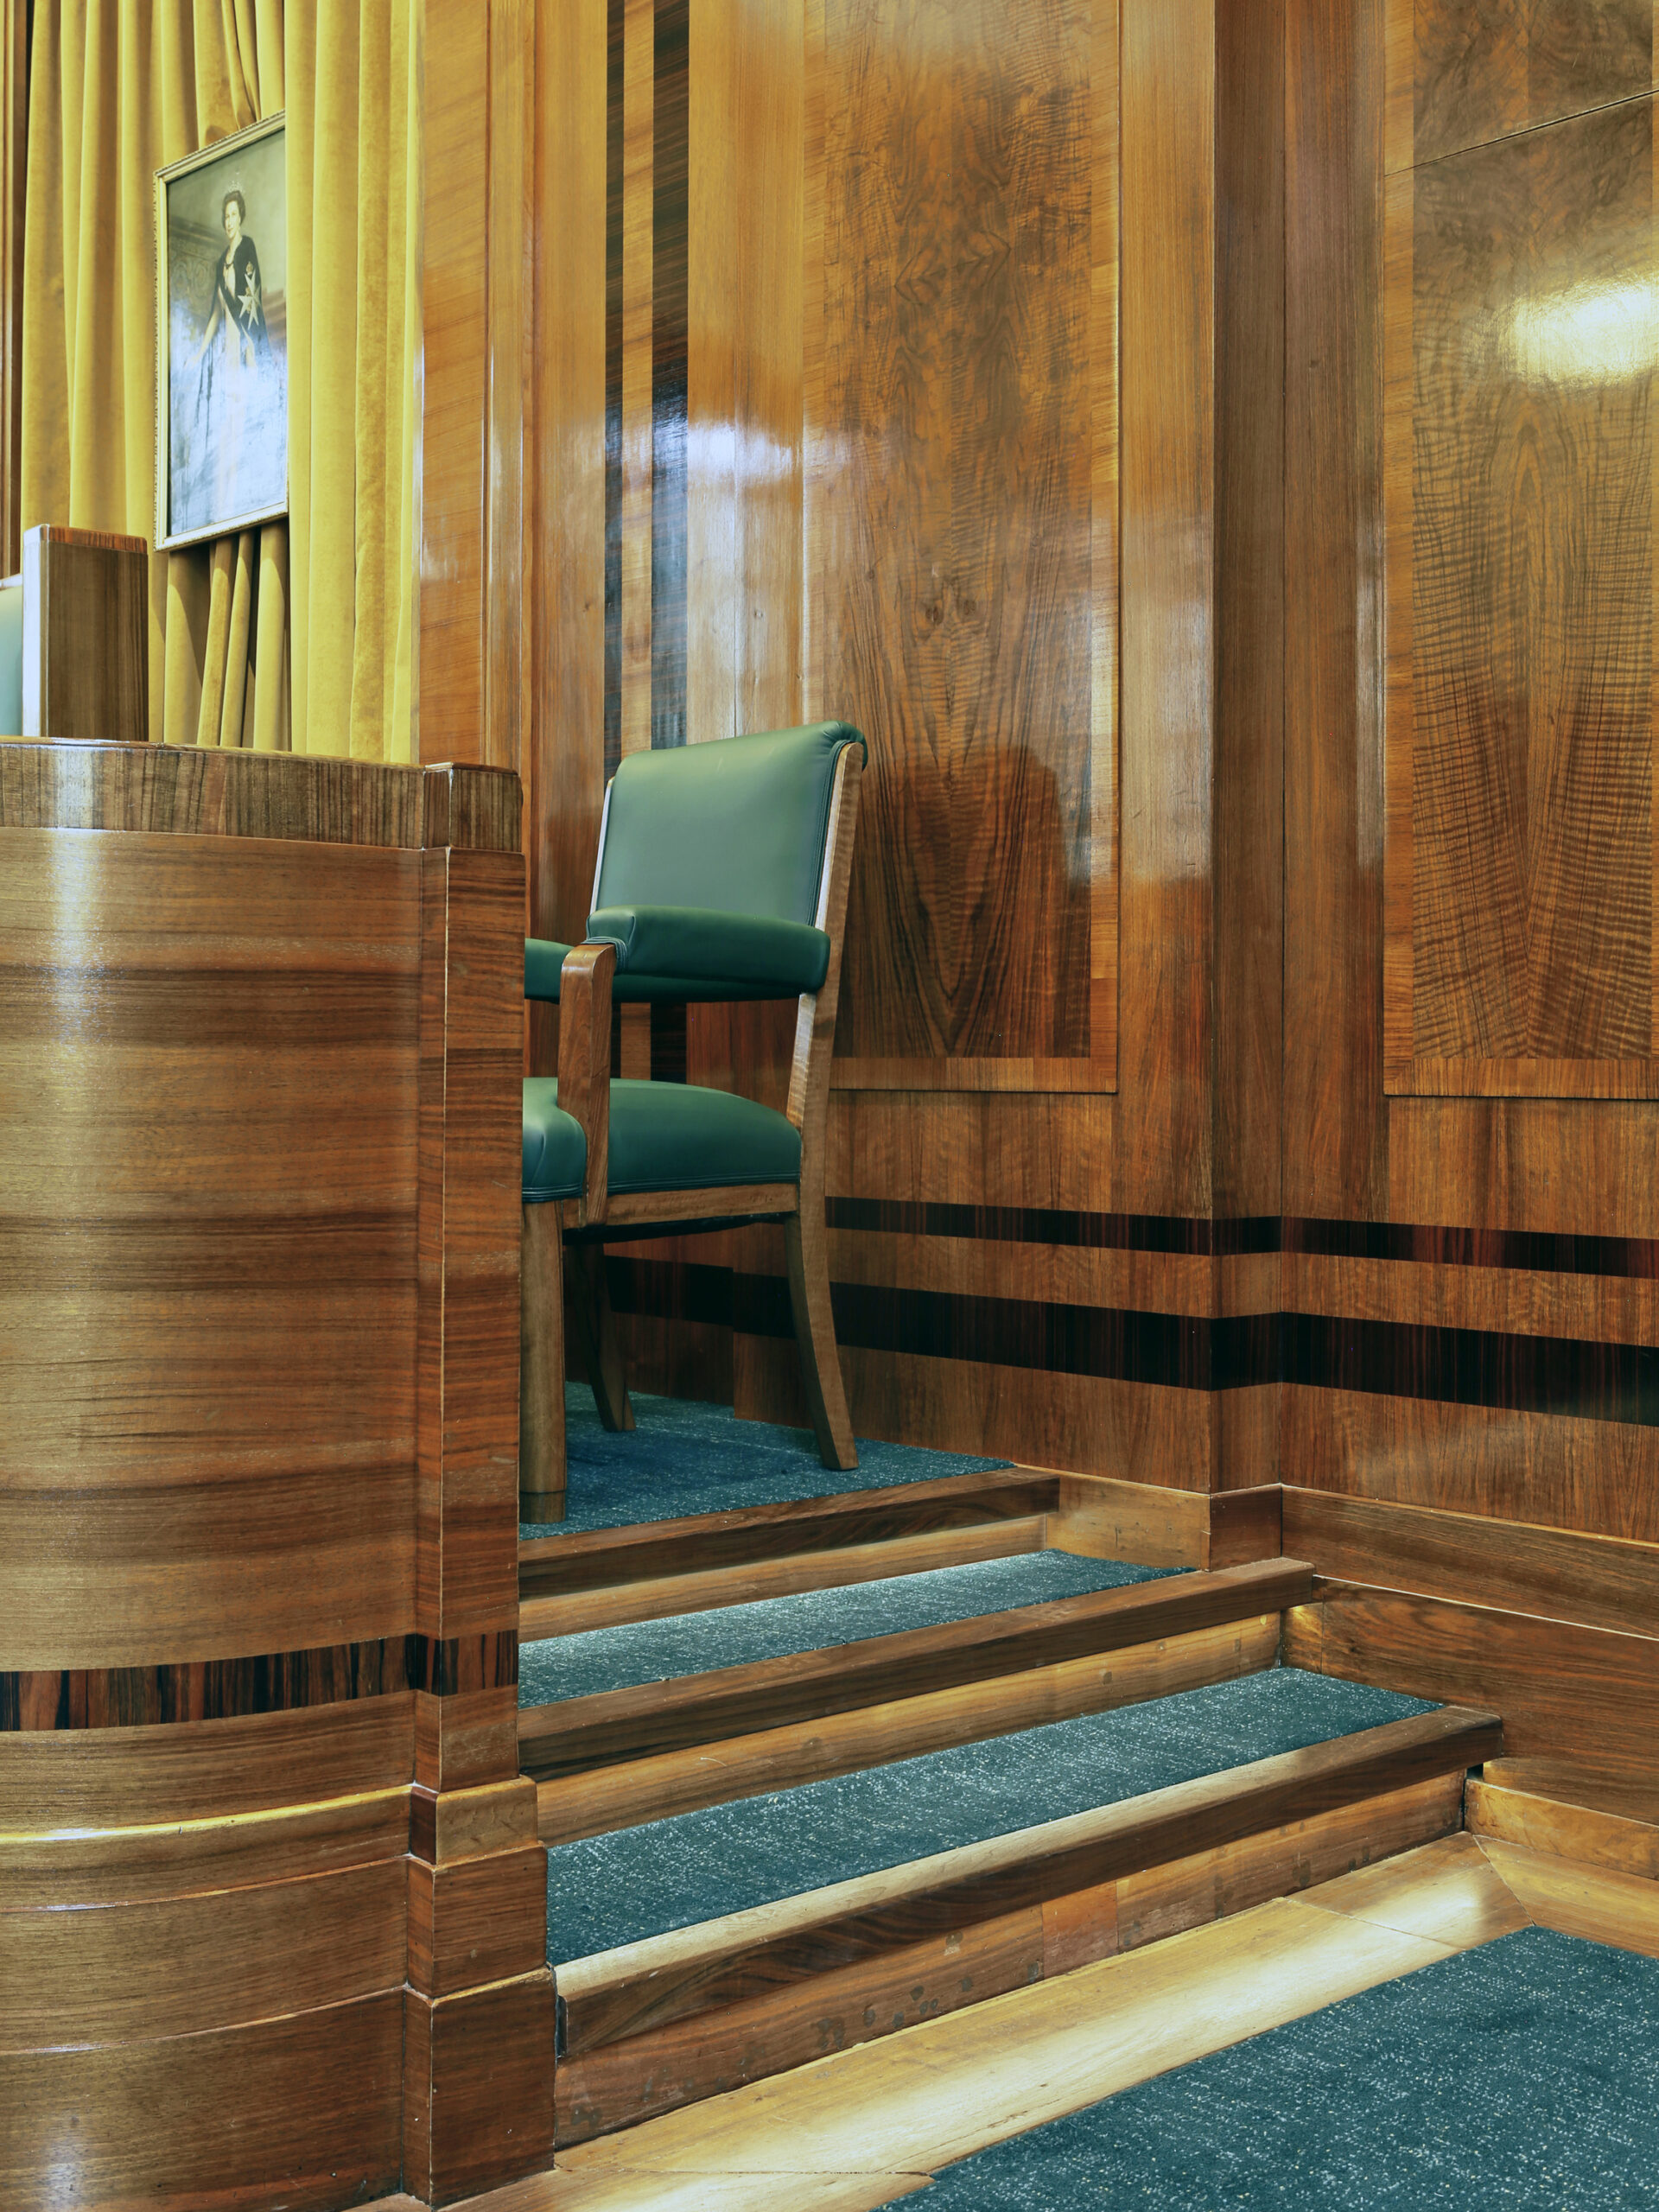 Interior shot of blue seating in the council chamber rooms at Hackney Town Hall